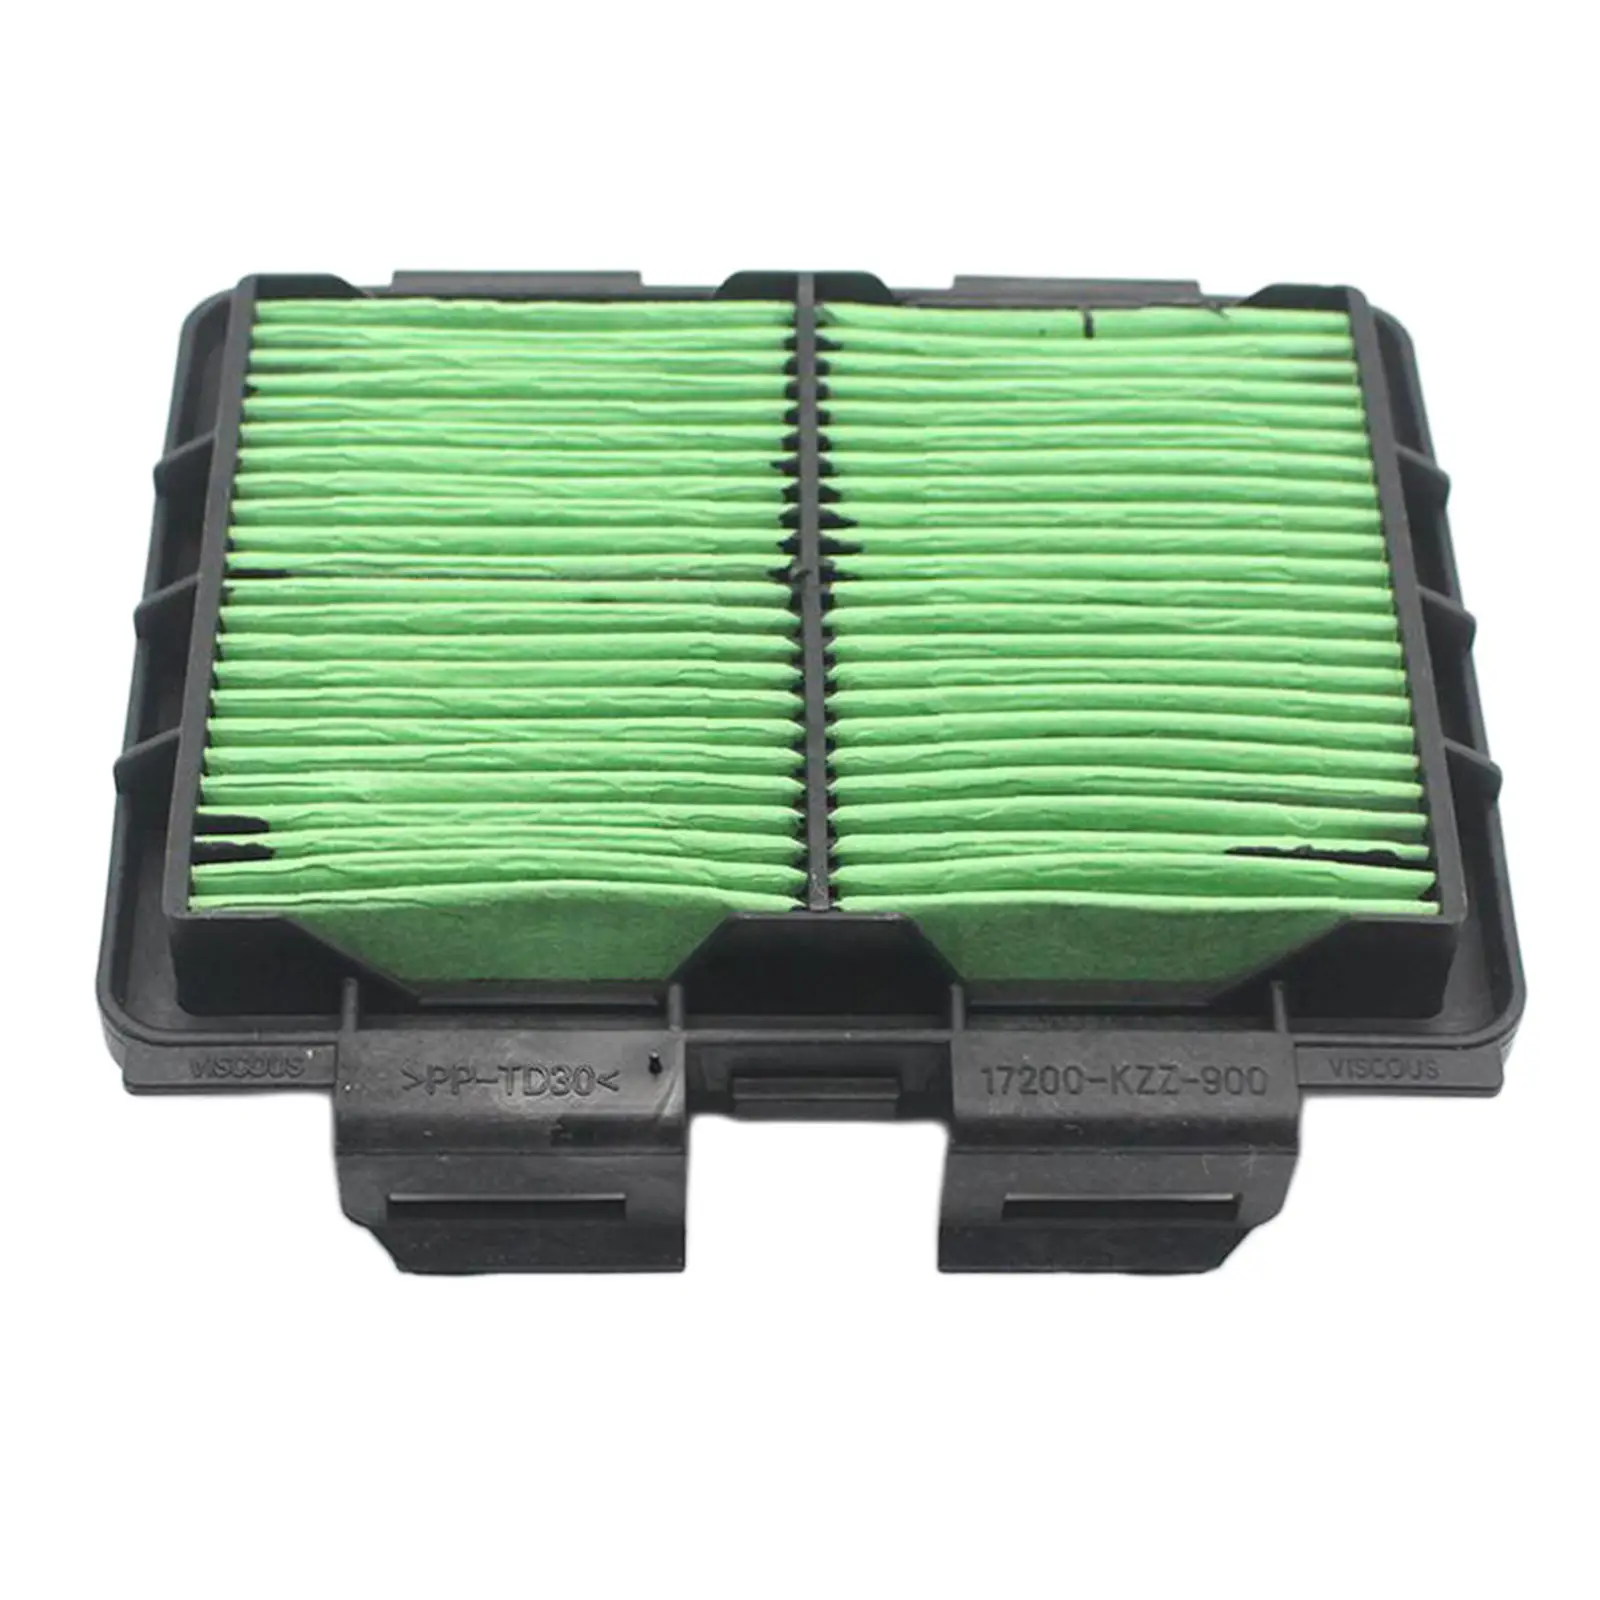 Motorcycle Air Filter Cleaner Replaces fits for HONDA CRF250L CRF250 2013 -2016,